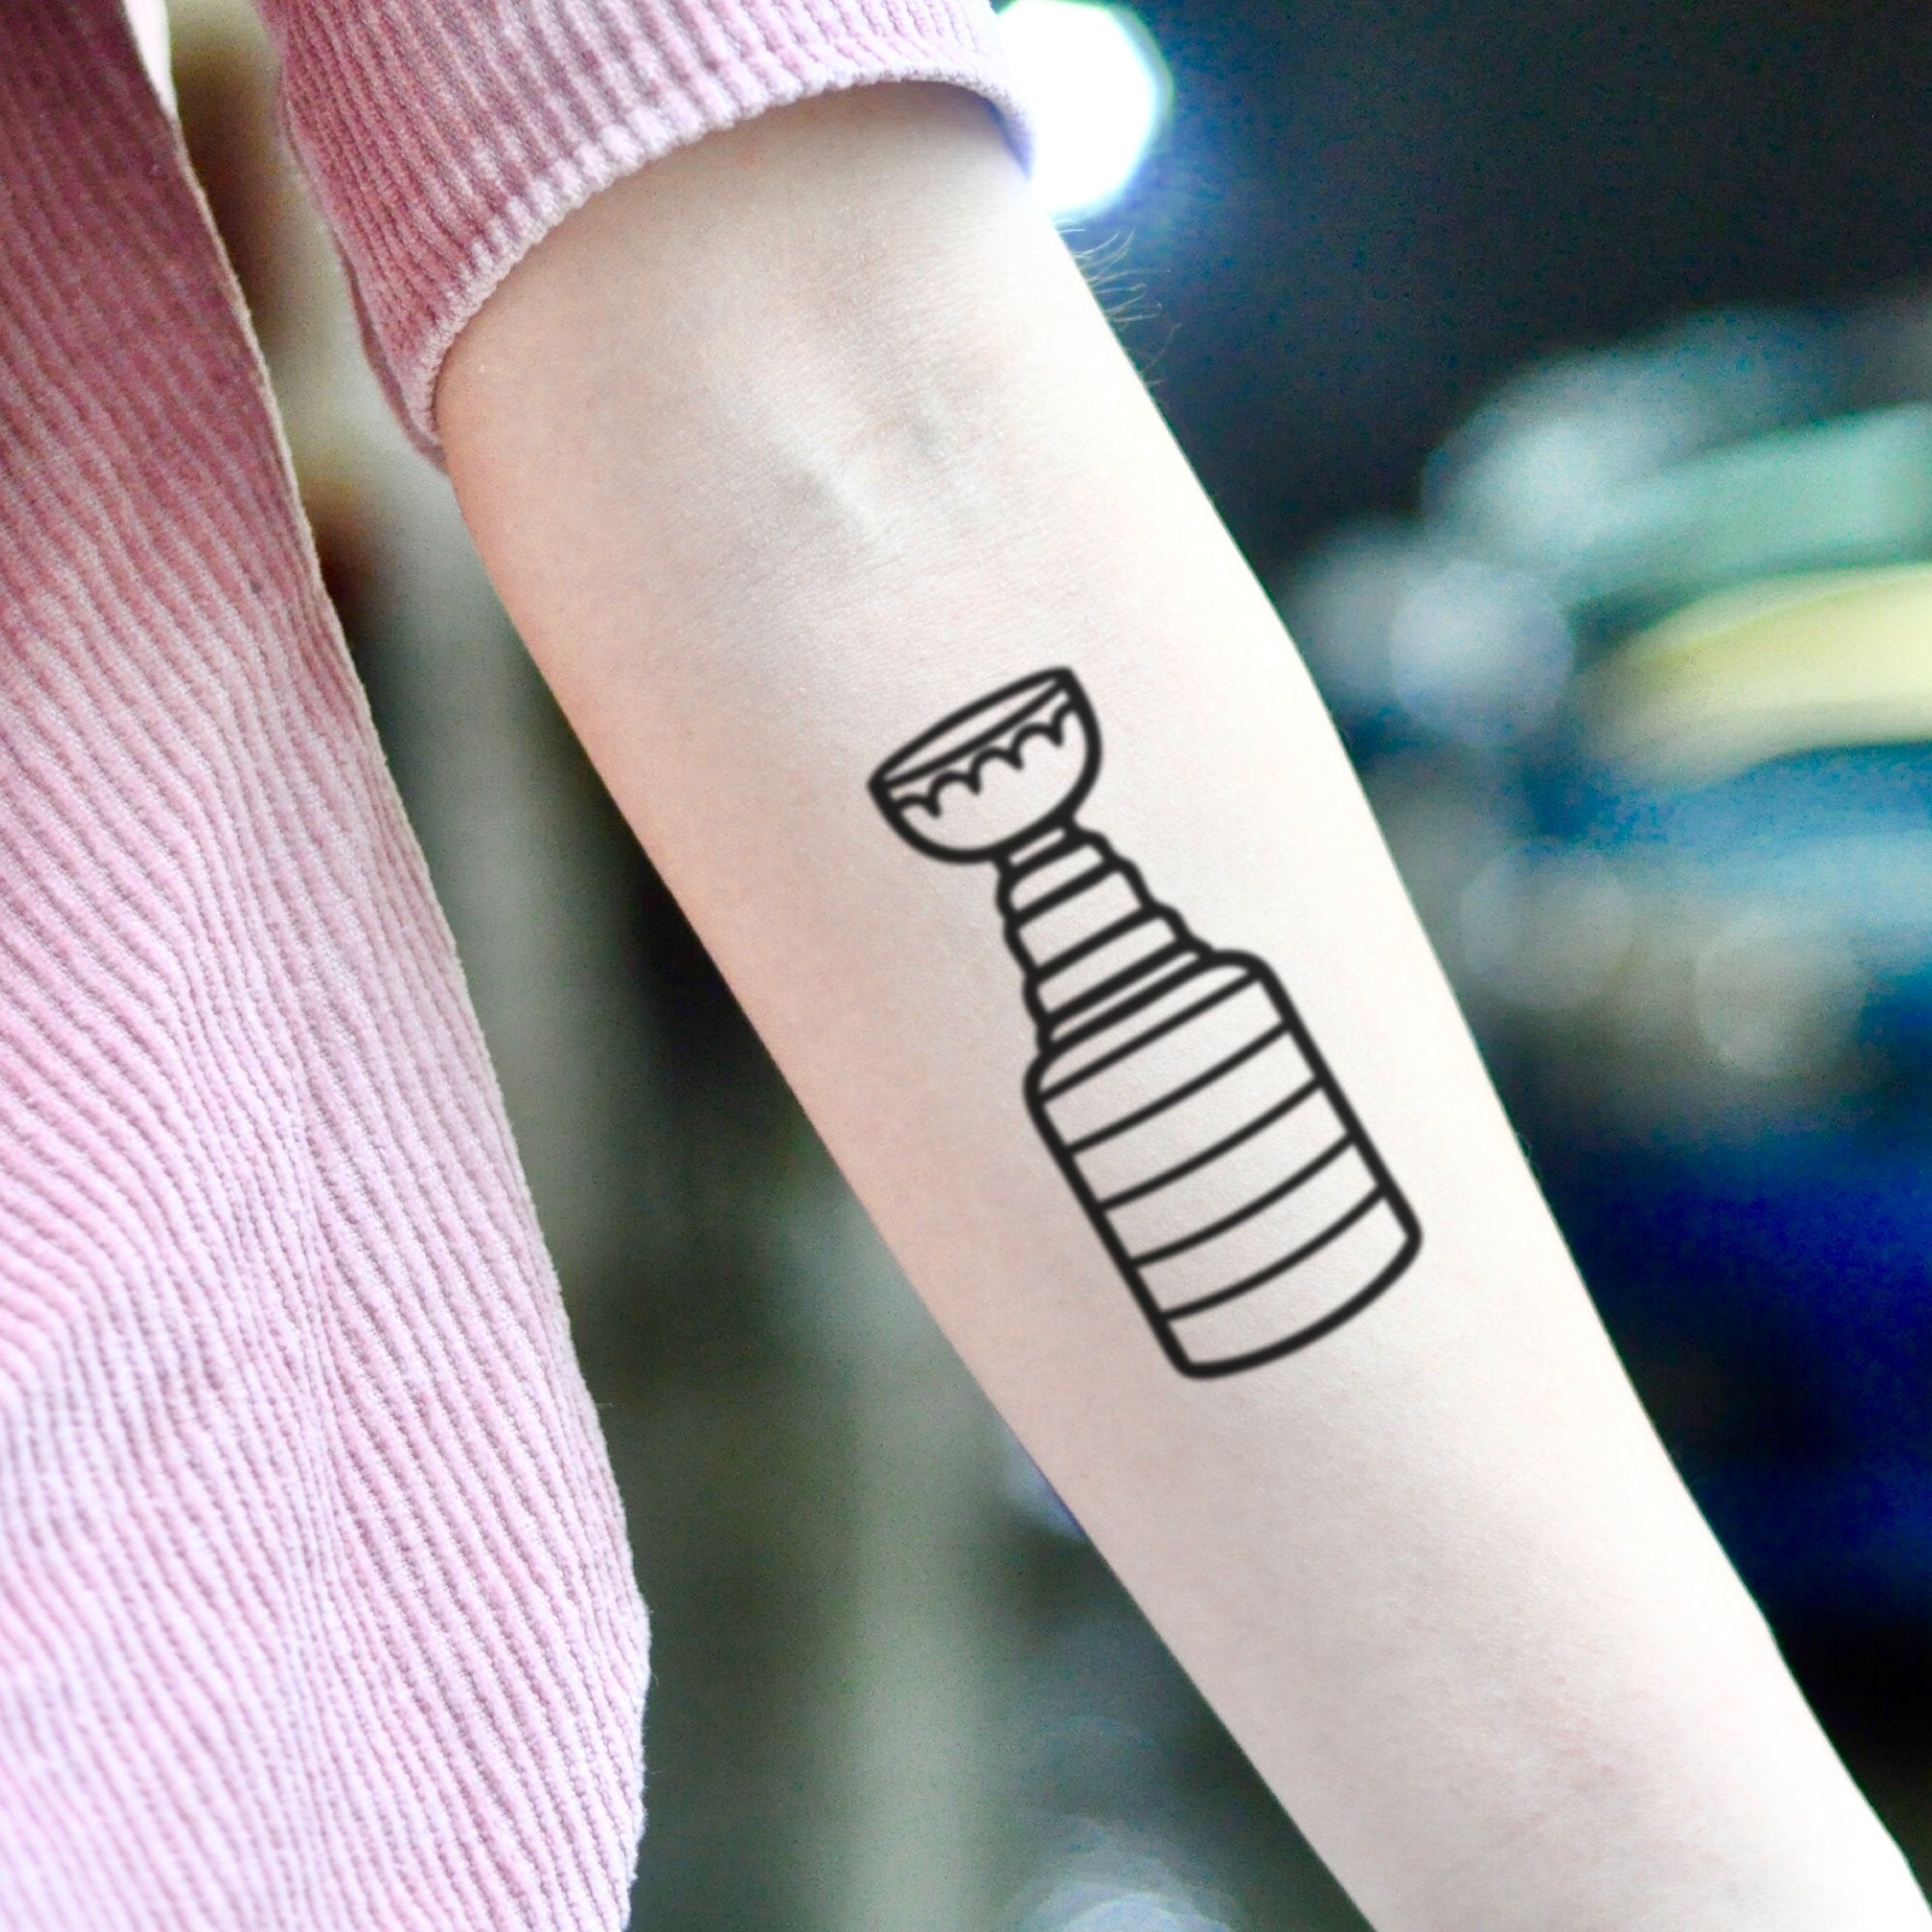 Stanley Cup Temporary Tattoo Sticker - OhMyTat